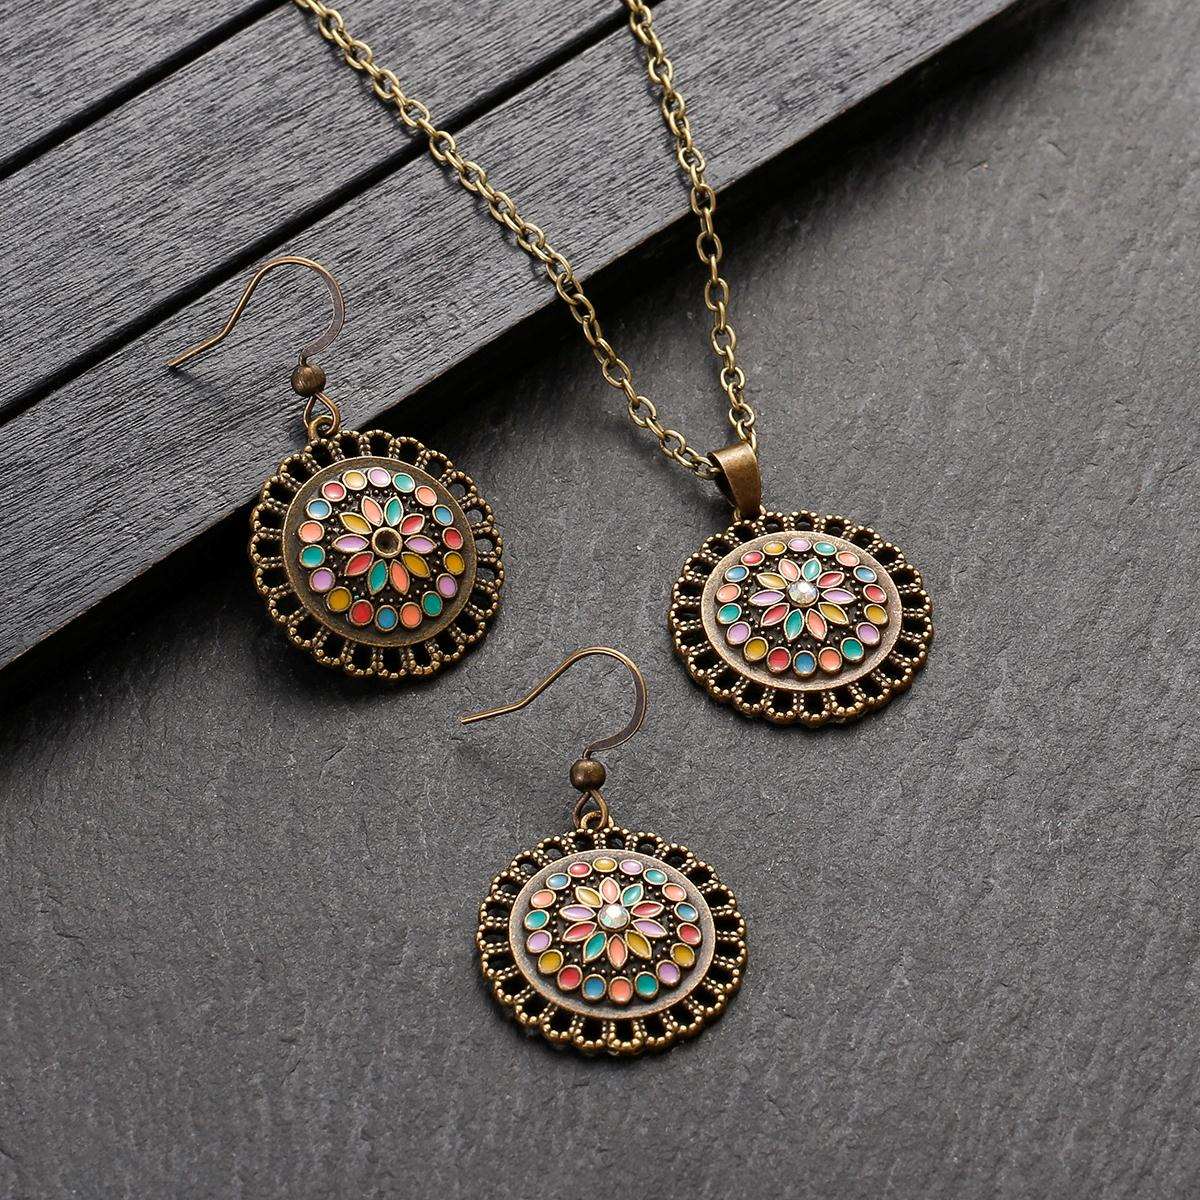 Boho Colorful Beads Jewelry Sets for Women Vintage Gold Color Alloy Flower Necklace Pendant Earring Sets Bridal Wedding Jewelry